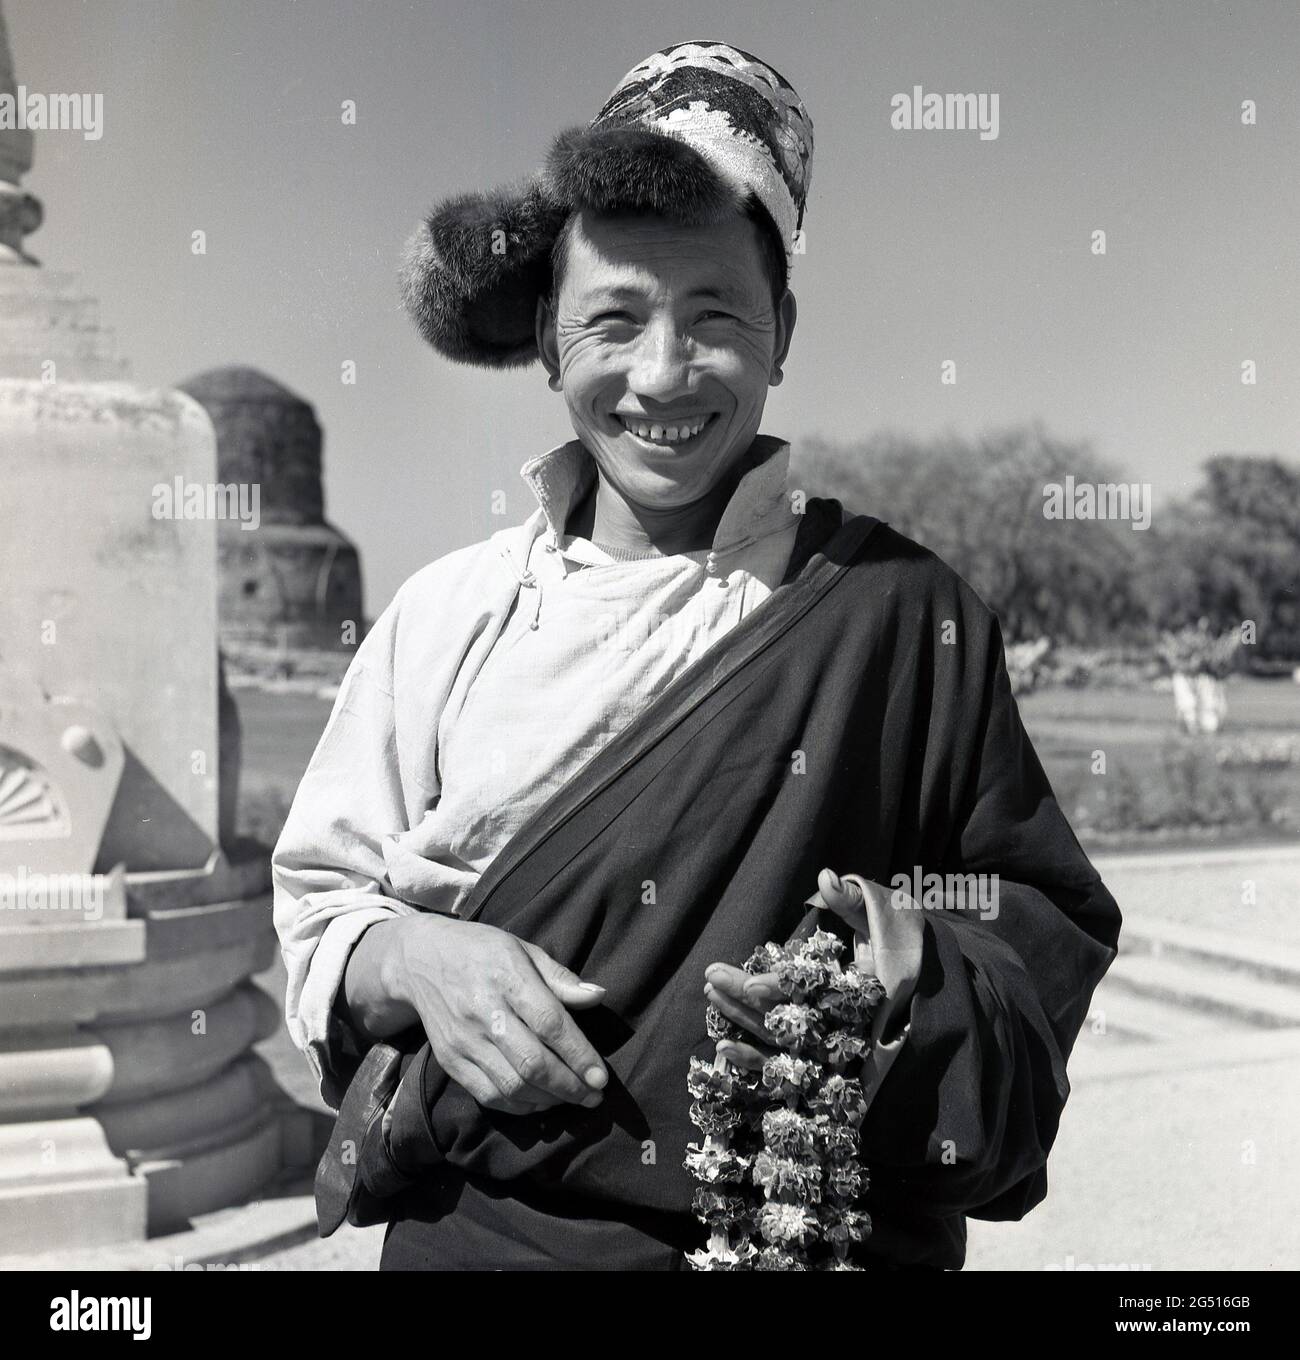 1950s, historical photo by J Allan Cash of a smiling, happy youth standing outside the Buddhist temple, mulagandhakuti vihara, Sarnath,Varanasi, india, holding flower garlands or braids, which are worn around the neck and which he is offering or selling to visitors. The temple was built in 1931 - on the site where the Buddha Gautama mediated during his first rainy season - by Angarika Dharmapala and is maintained and run by the Mahabodhi Society of which he founded. Stock Photo